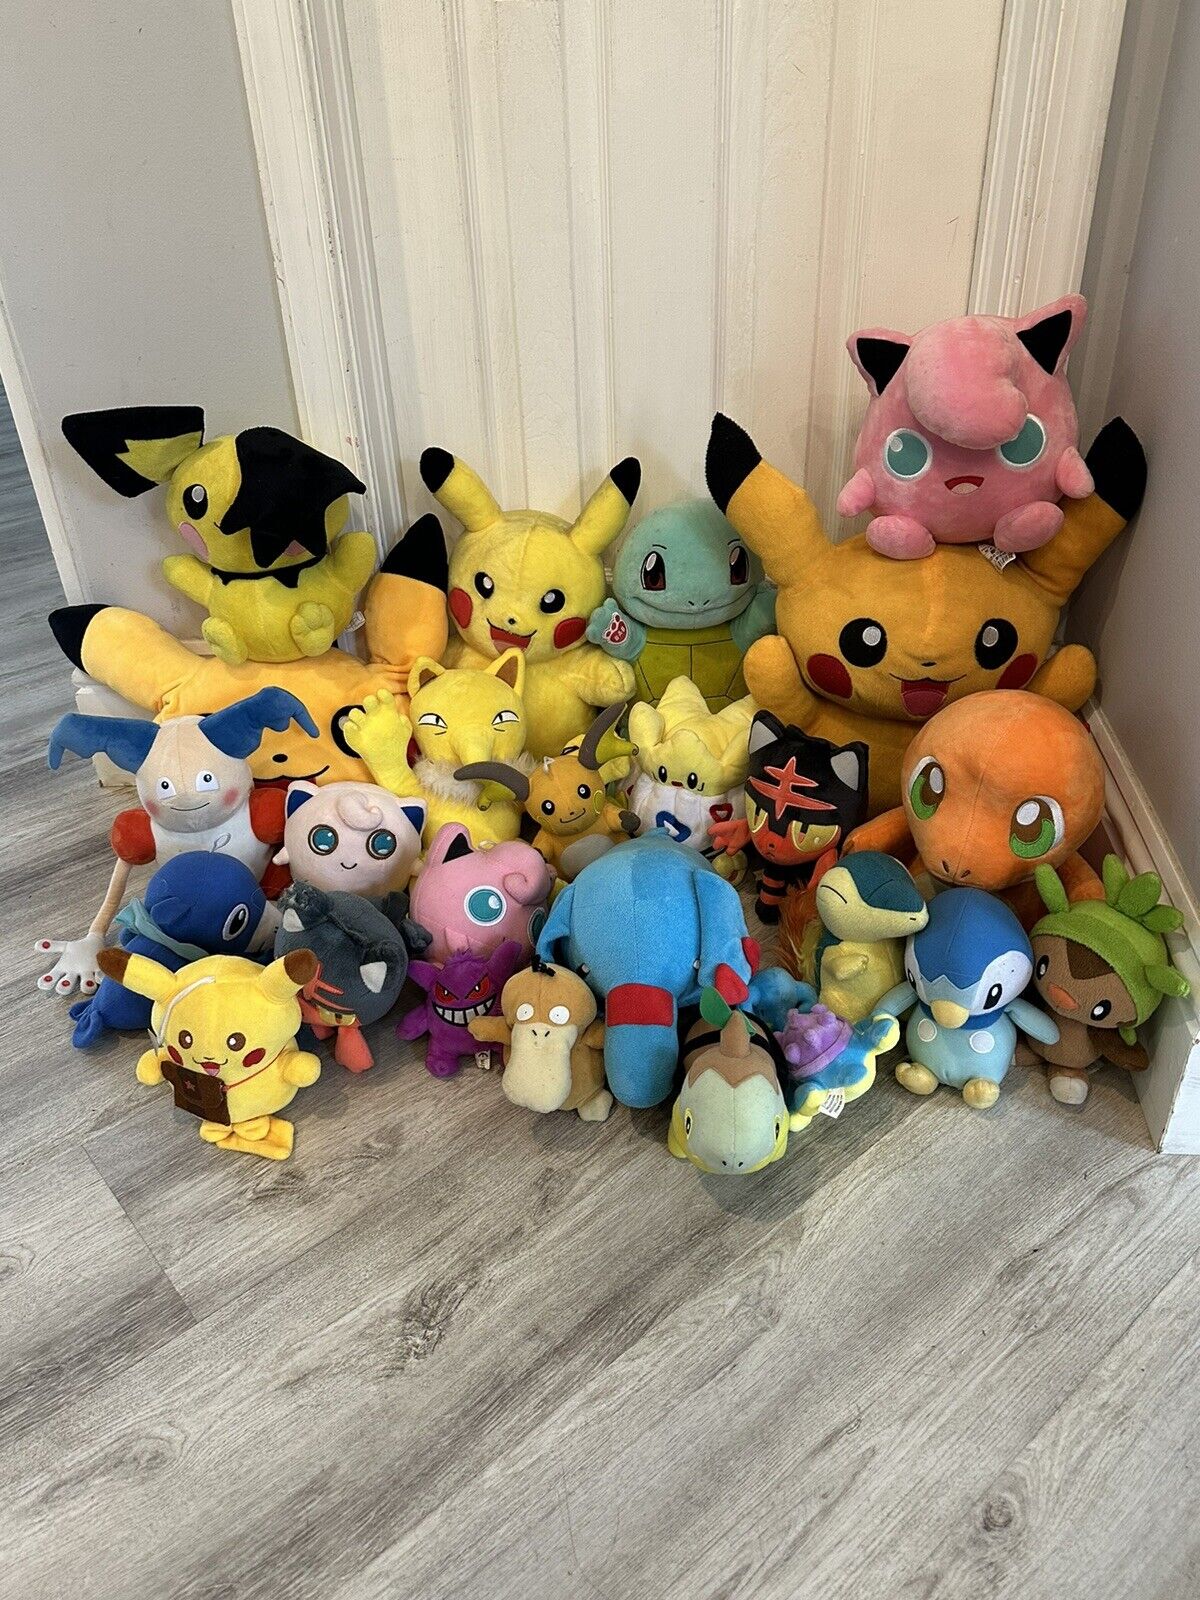 Lot Of 25 Pokemon Plush Variety Of Characters Some Have Damage See Description